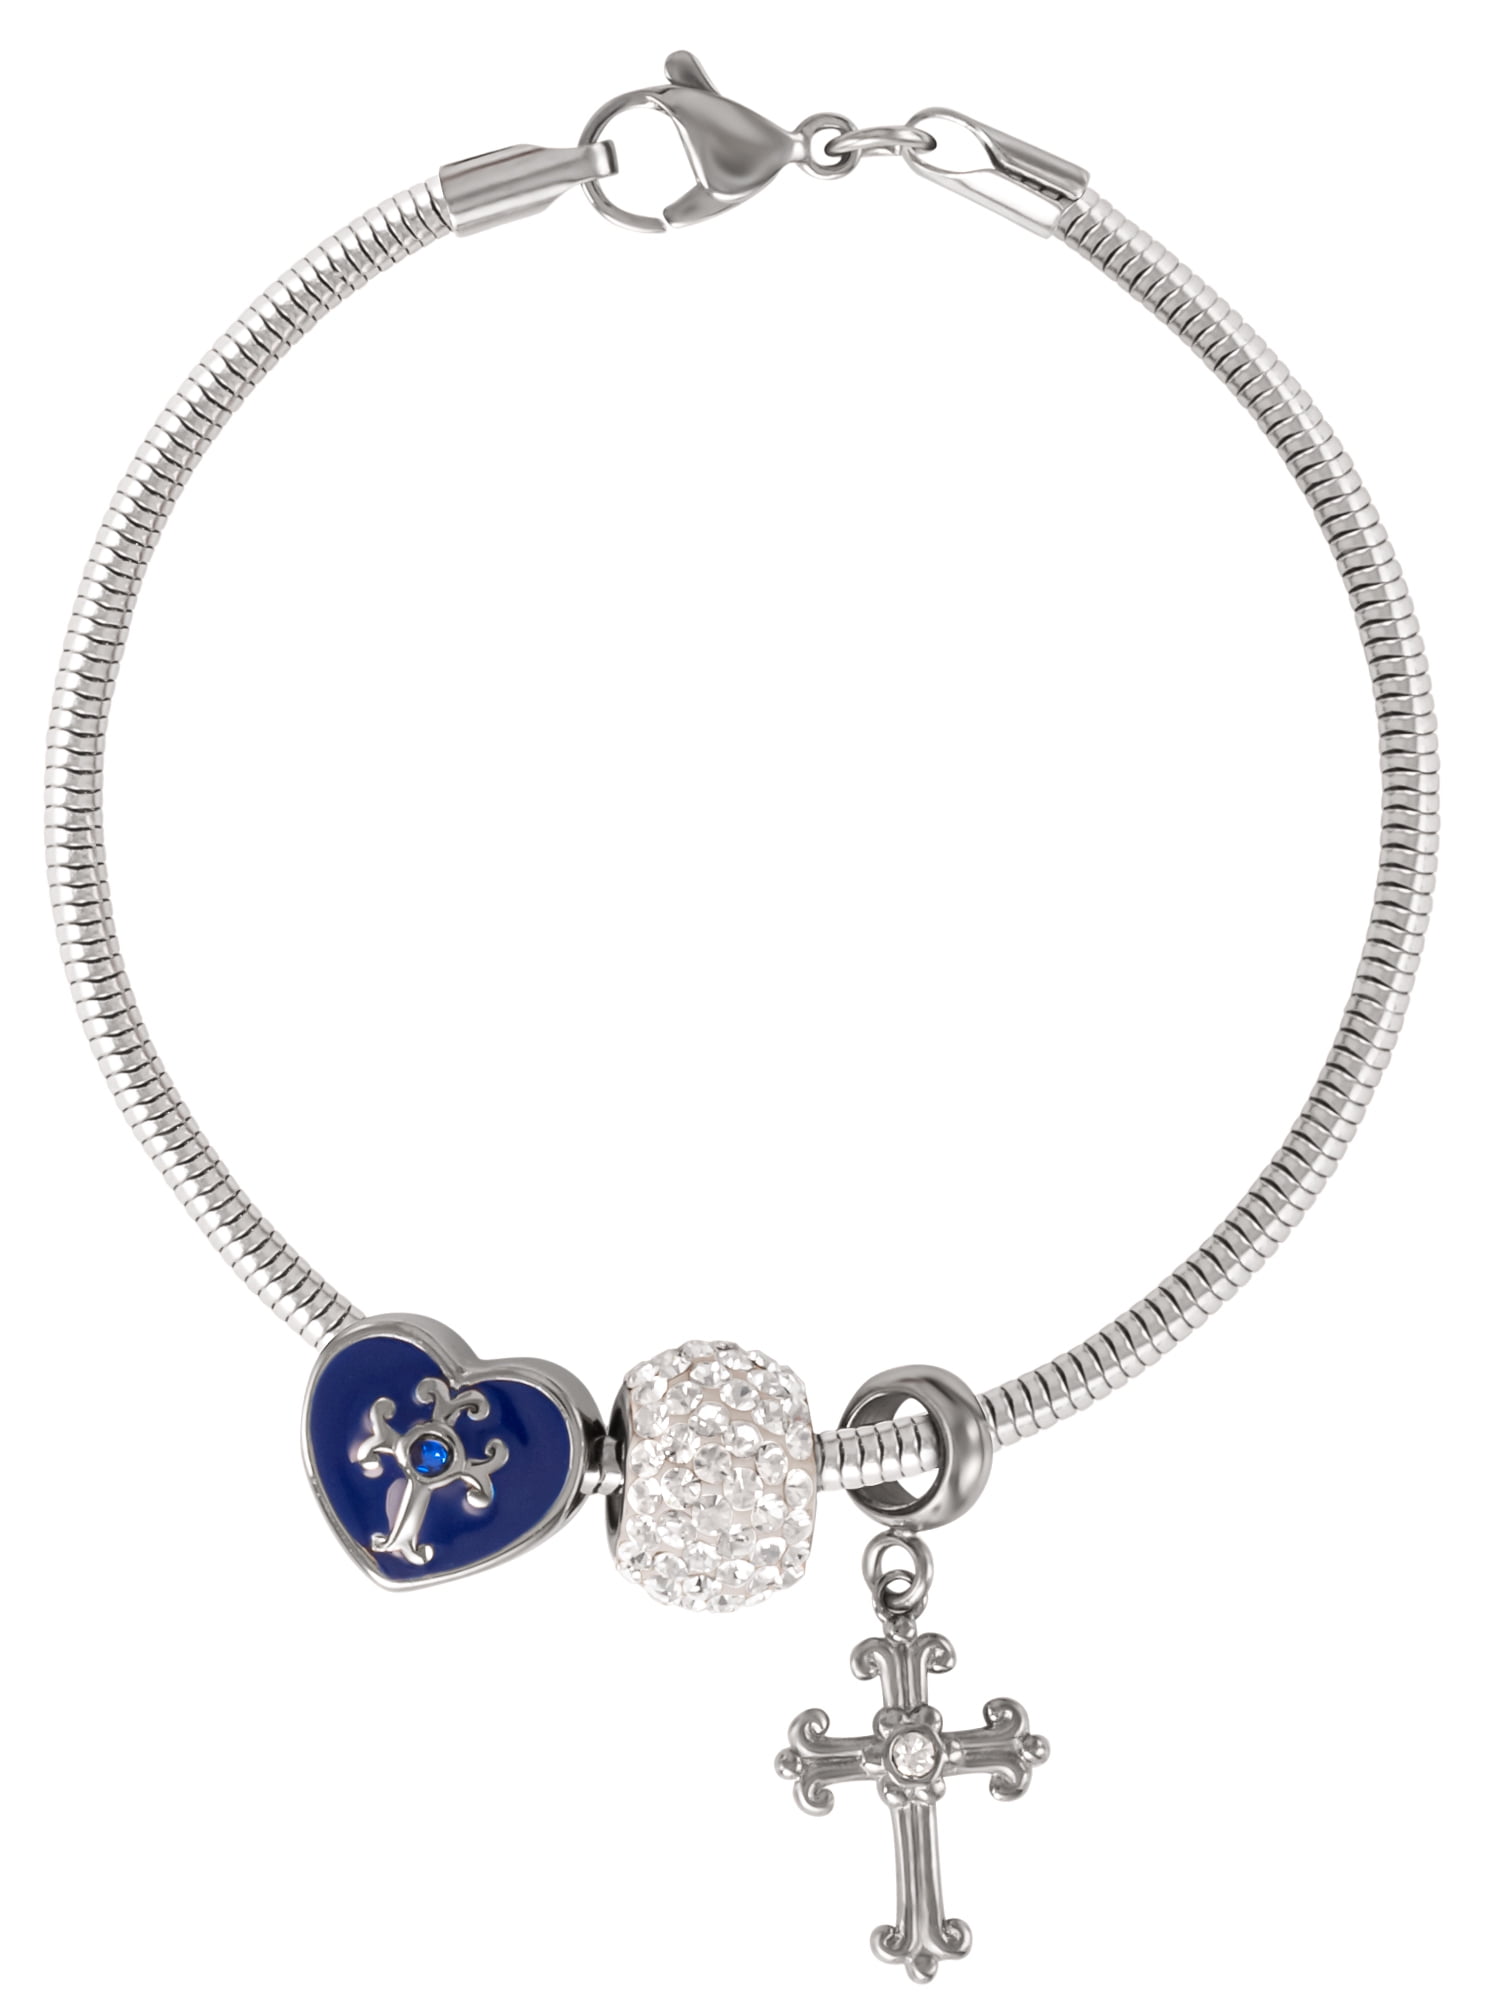 Connections from Hallmark Multi-Crystal Stainless Steel "I Love You" Charm Bra..